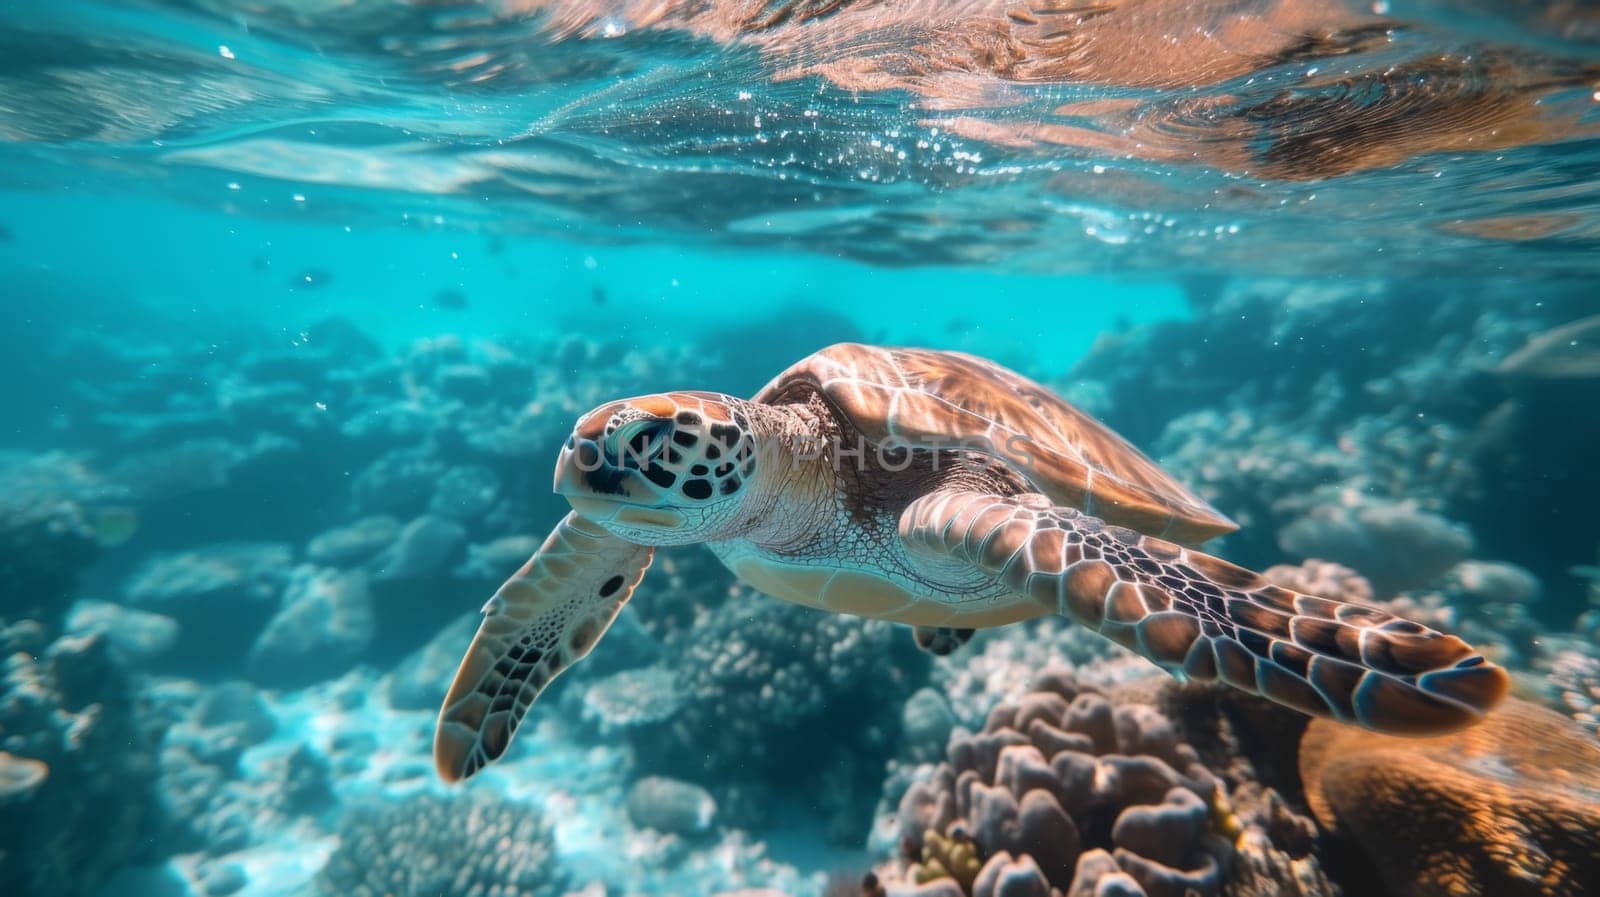 A turtle swimming over a coral reef in the ocean